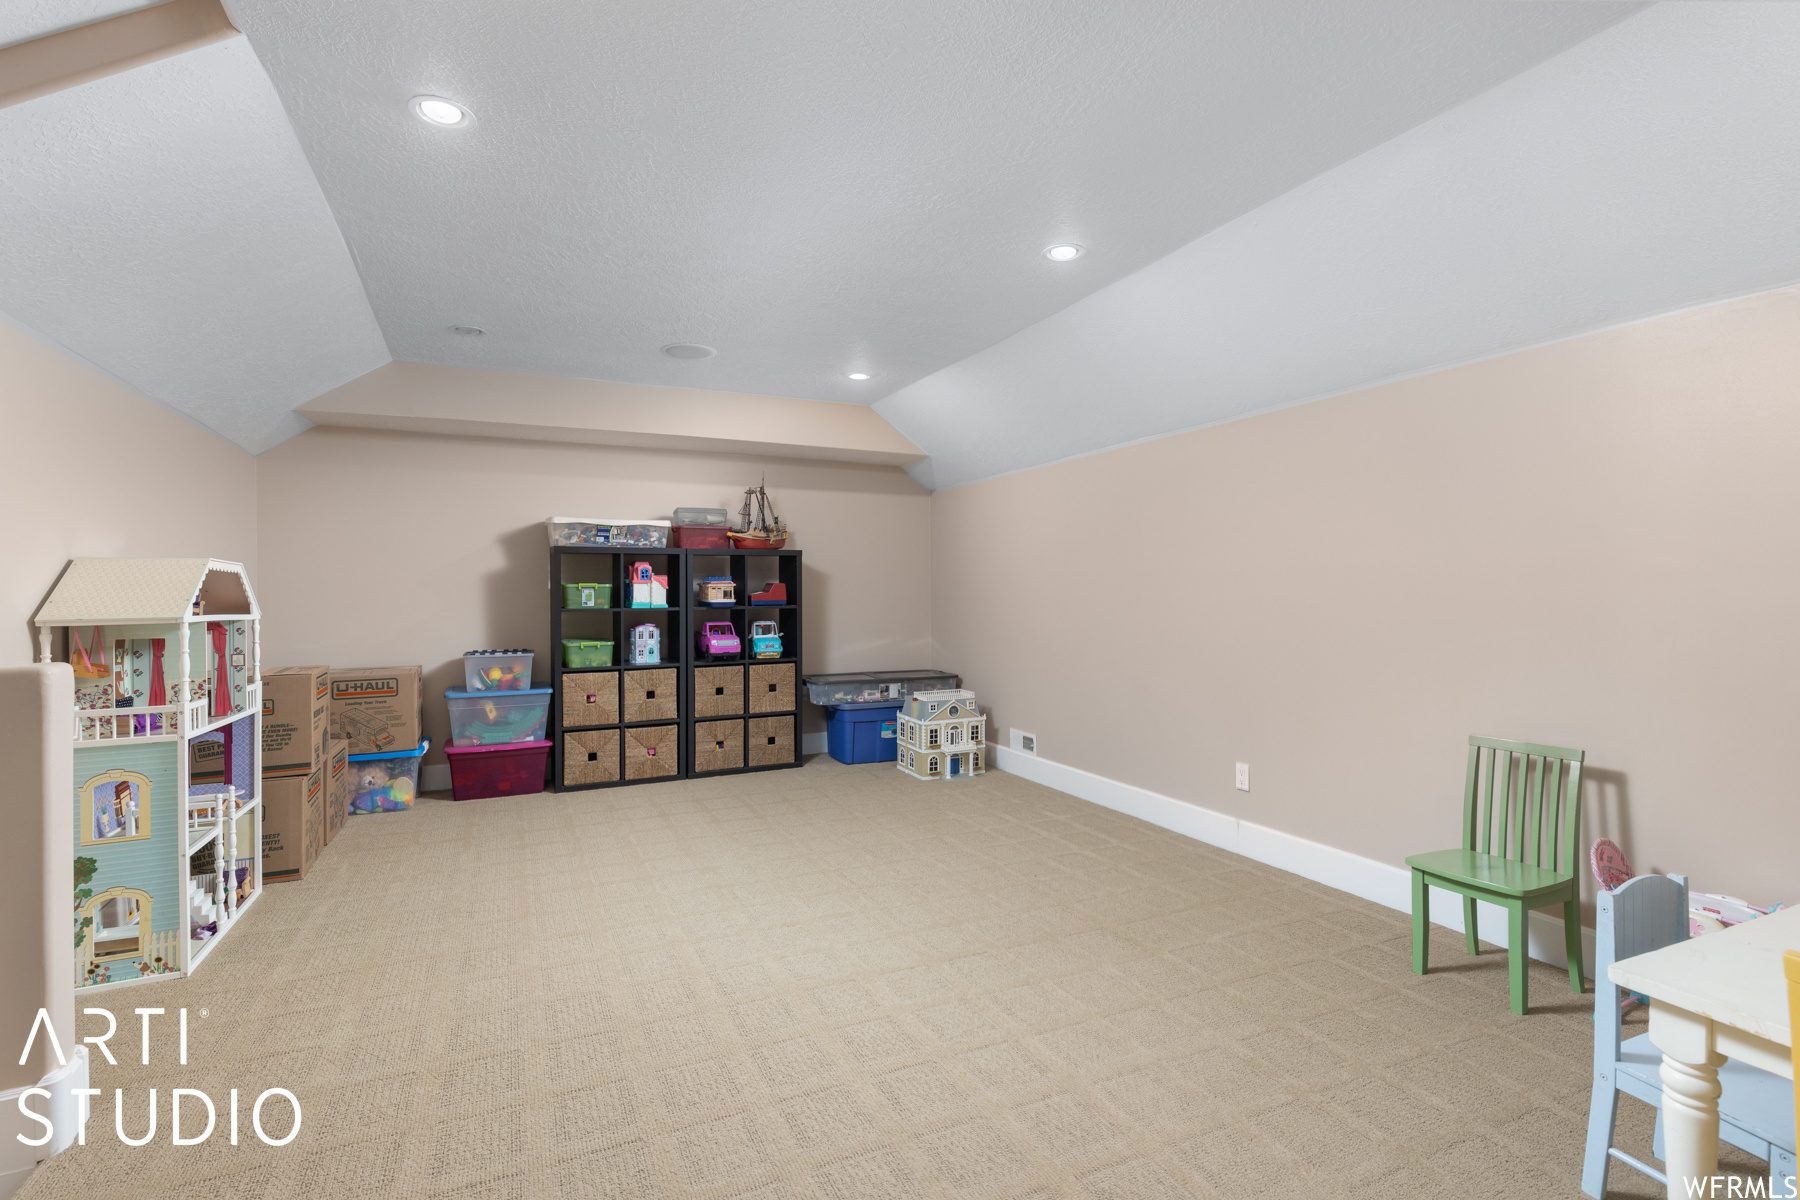 Game room over garage with vaulted ceiling and light carpet